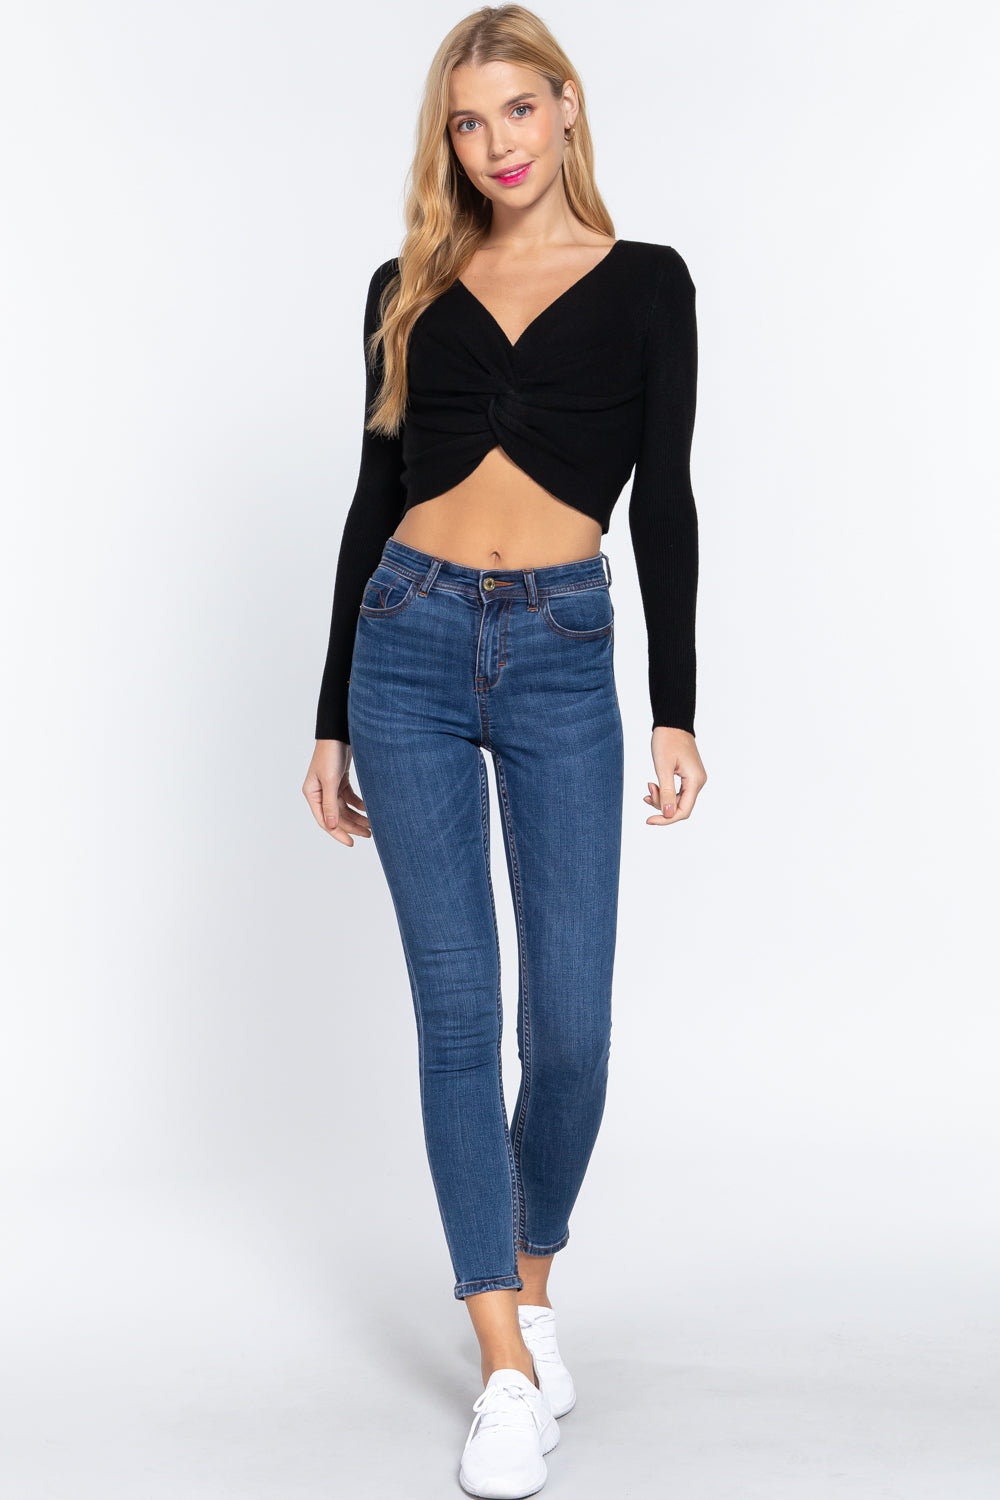 V-neck Front Knotted Crop Sweater- Multiple Colors